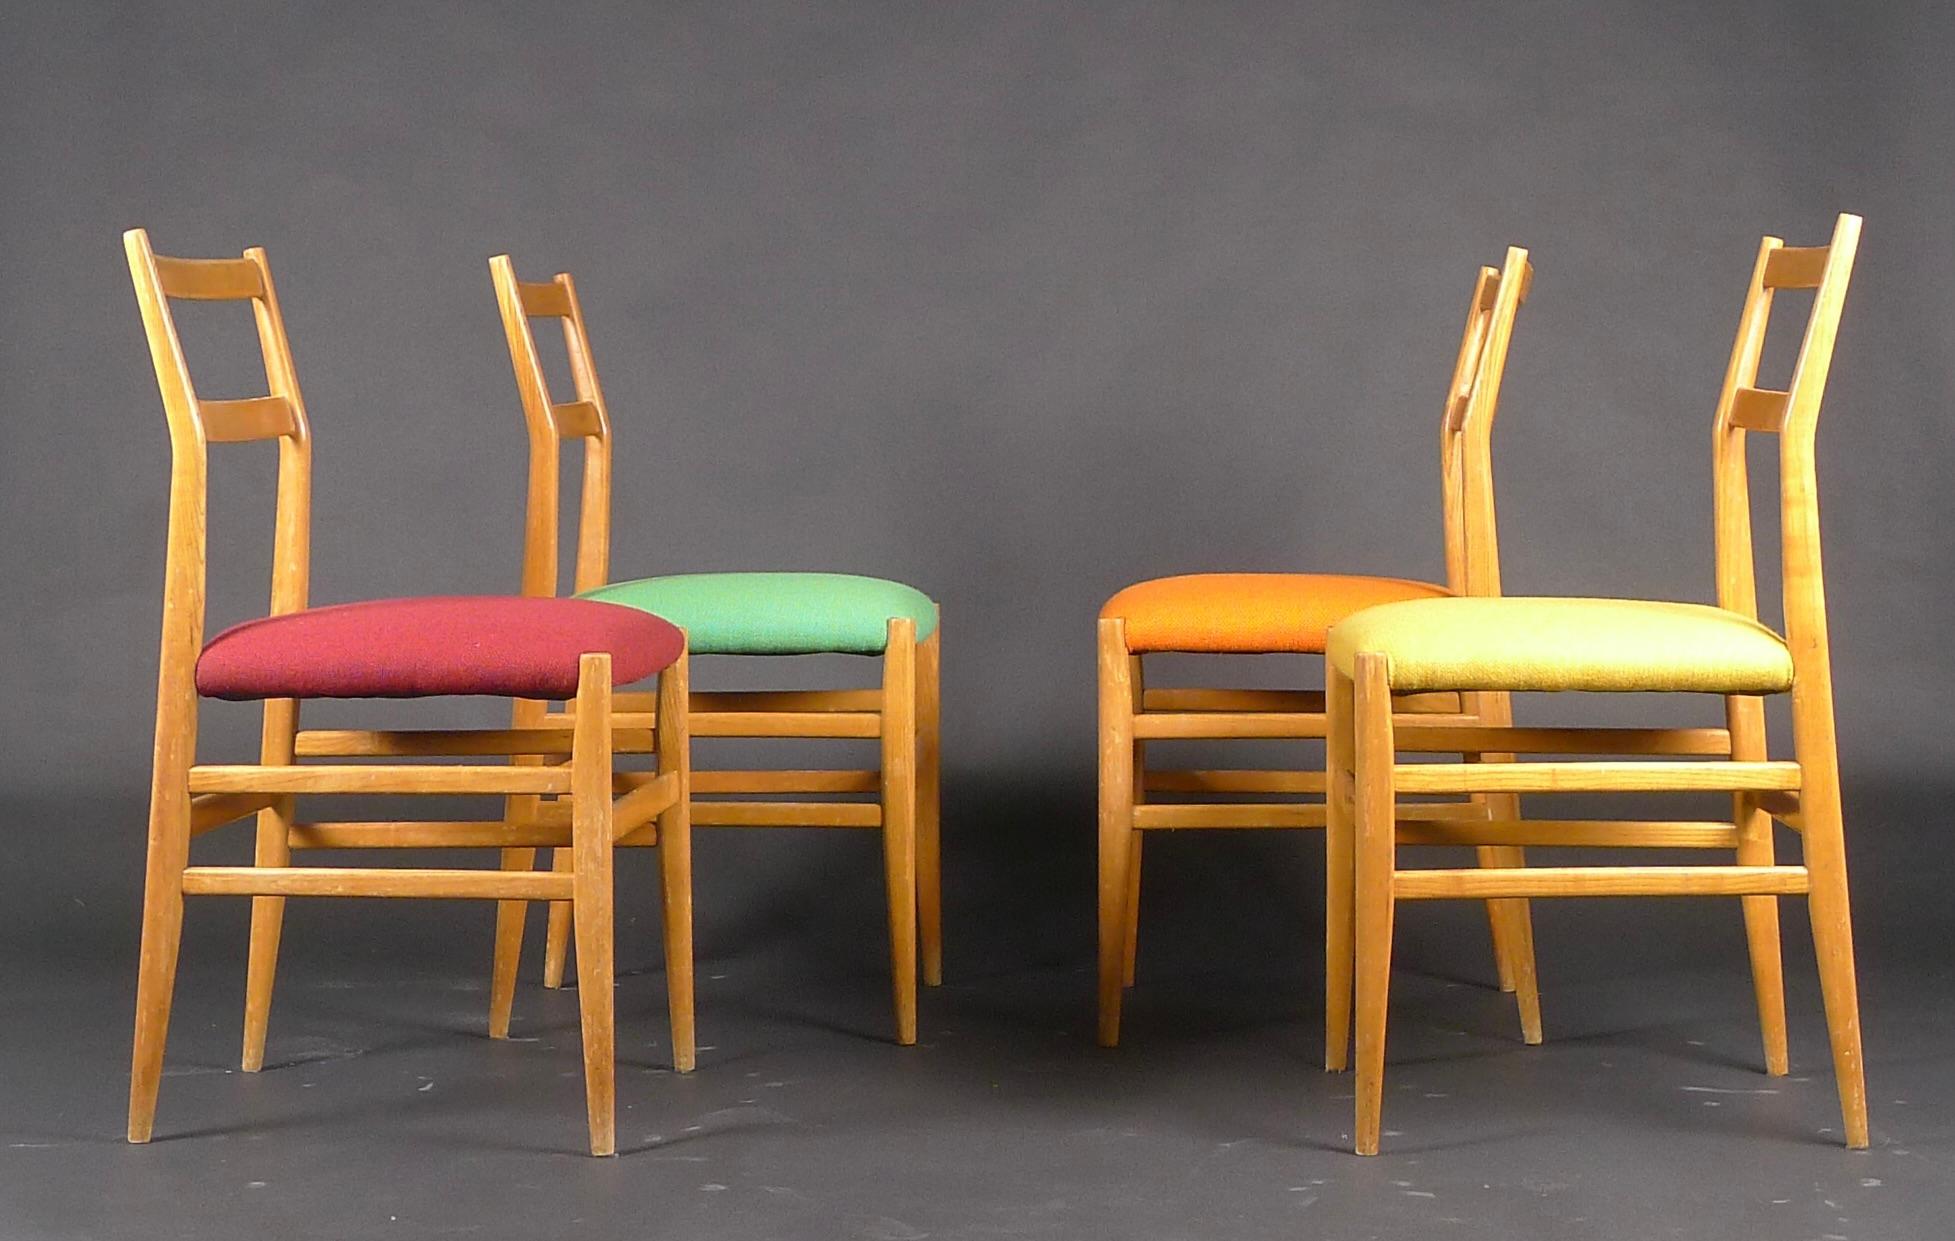 Gio Ponti for Cassina, Harlequin Set of Four Leggera Chairs, Model 646, 1950s

Ash frames, recently re-upholstered in Kvadrat fabric in yellow, green, red and orange.

Good condition, some small knocks and light scratches in line with age and use,